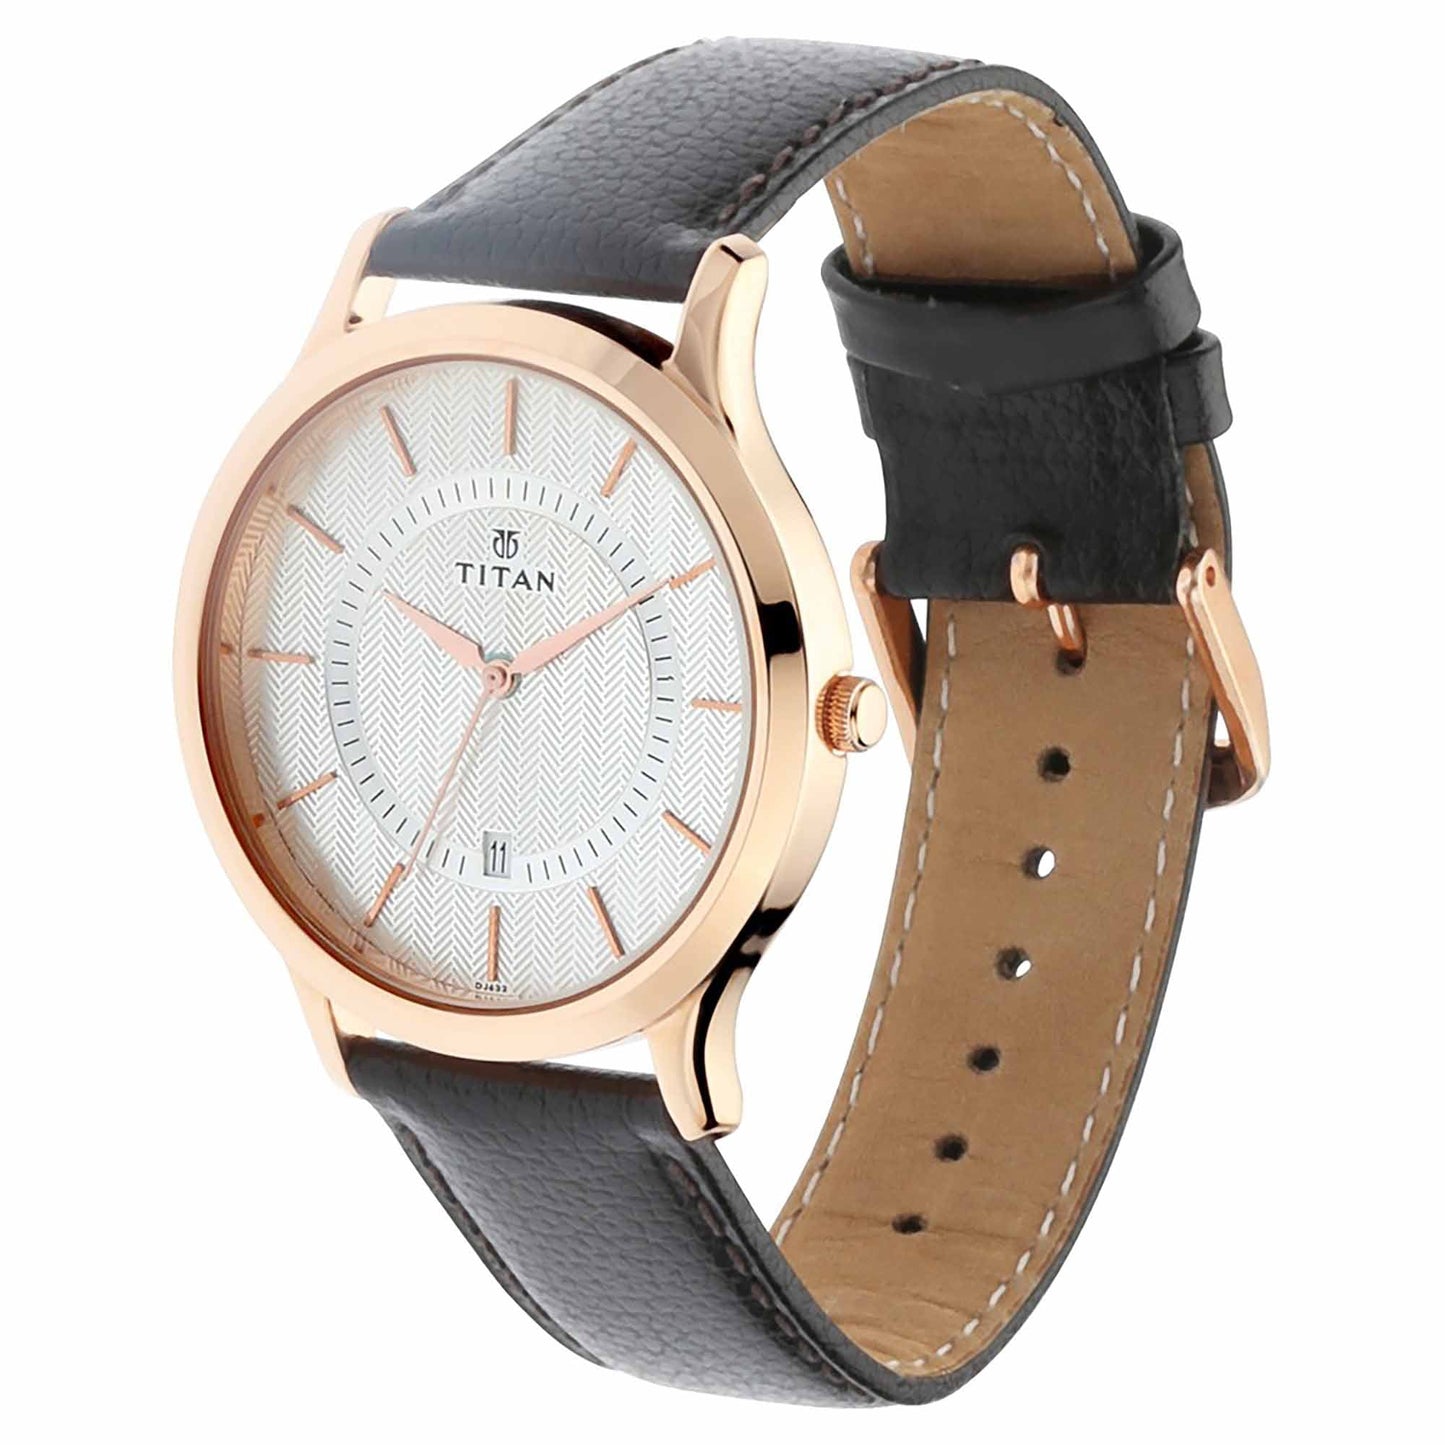 Titan Analog with Date Silver Dial Quartz Leather Strap watch for Men